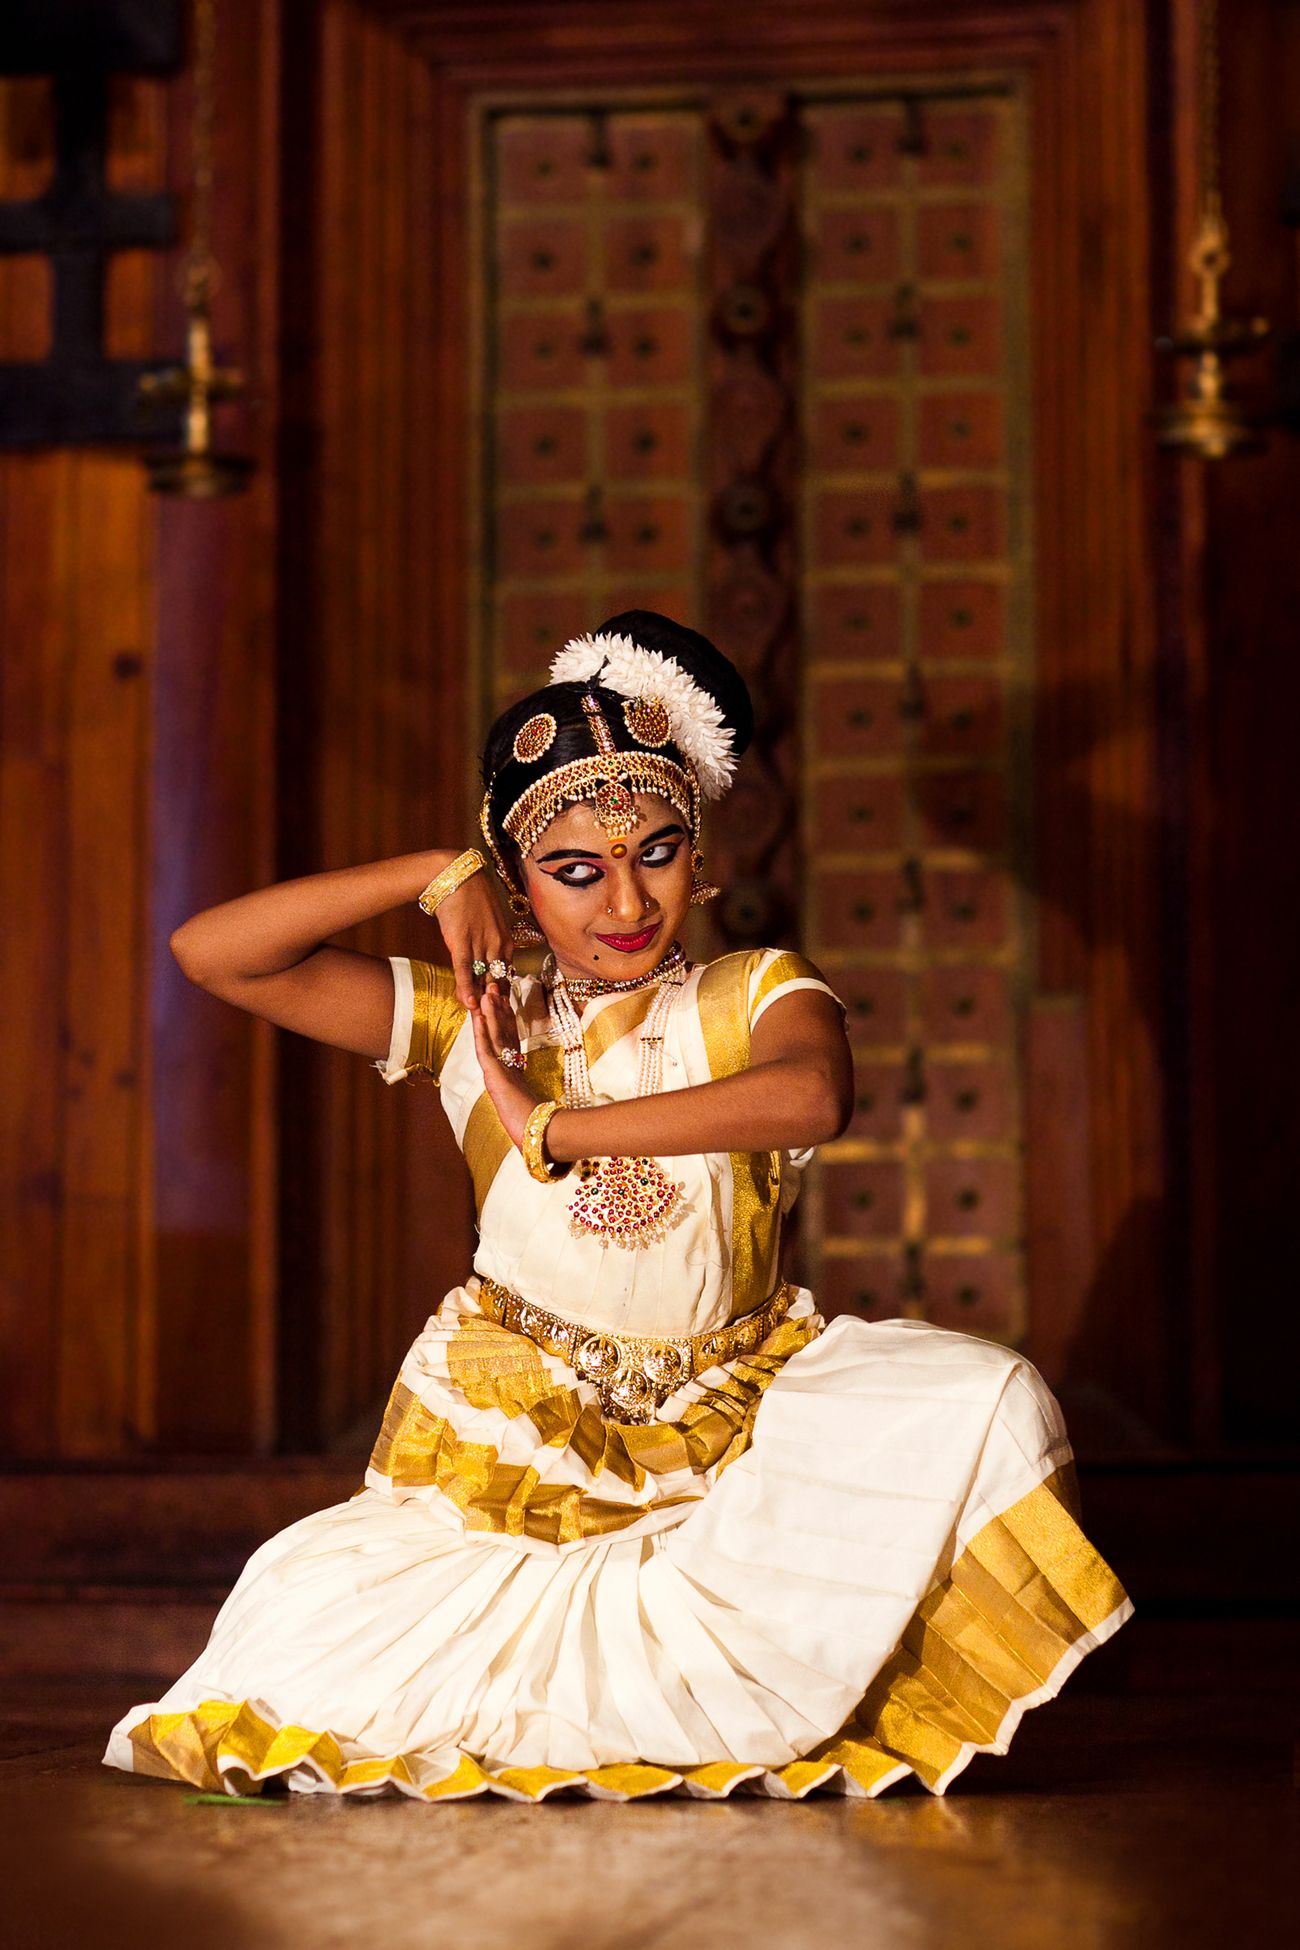 Young female dancer performing Mohiniyattam, or the dance of enchantress, a traditional South Indian dance form at Fort Kochi in Kerala